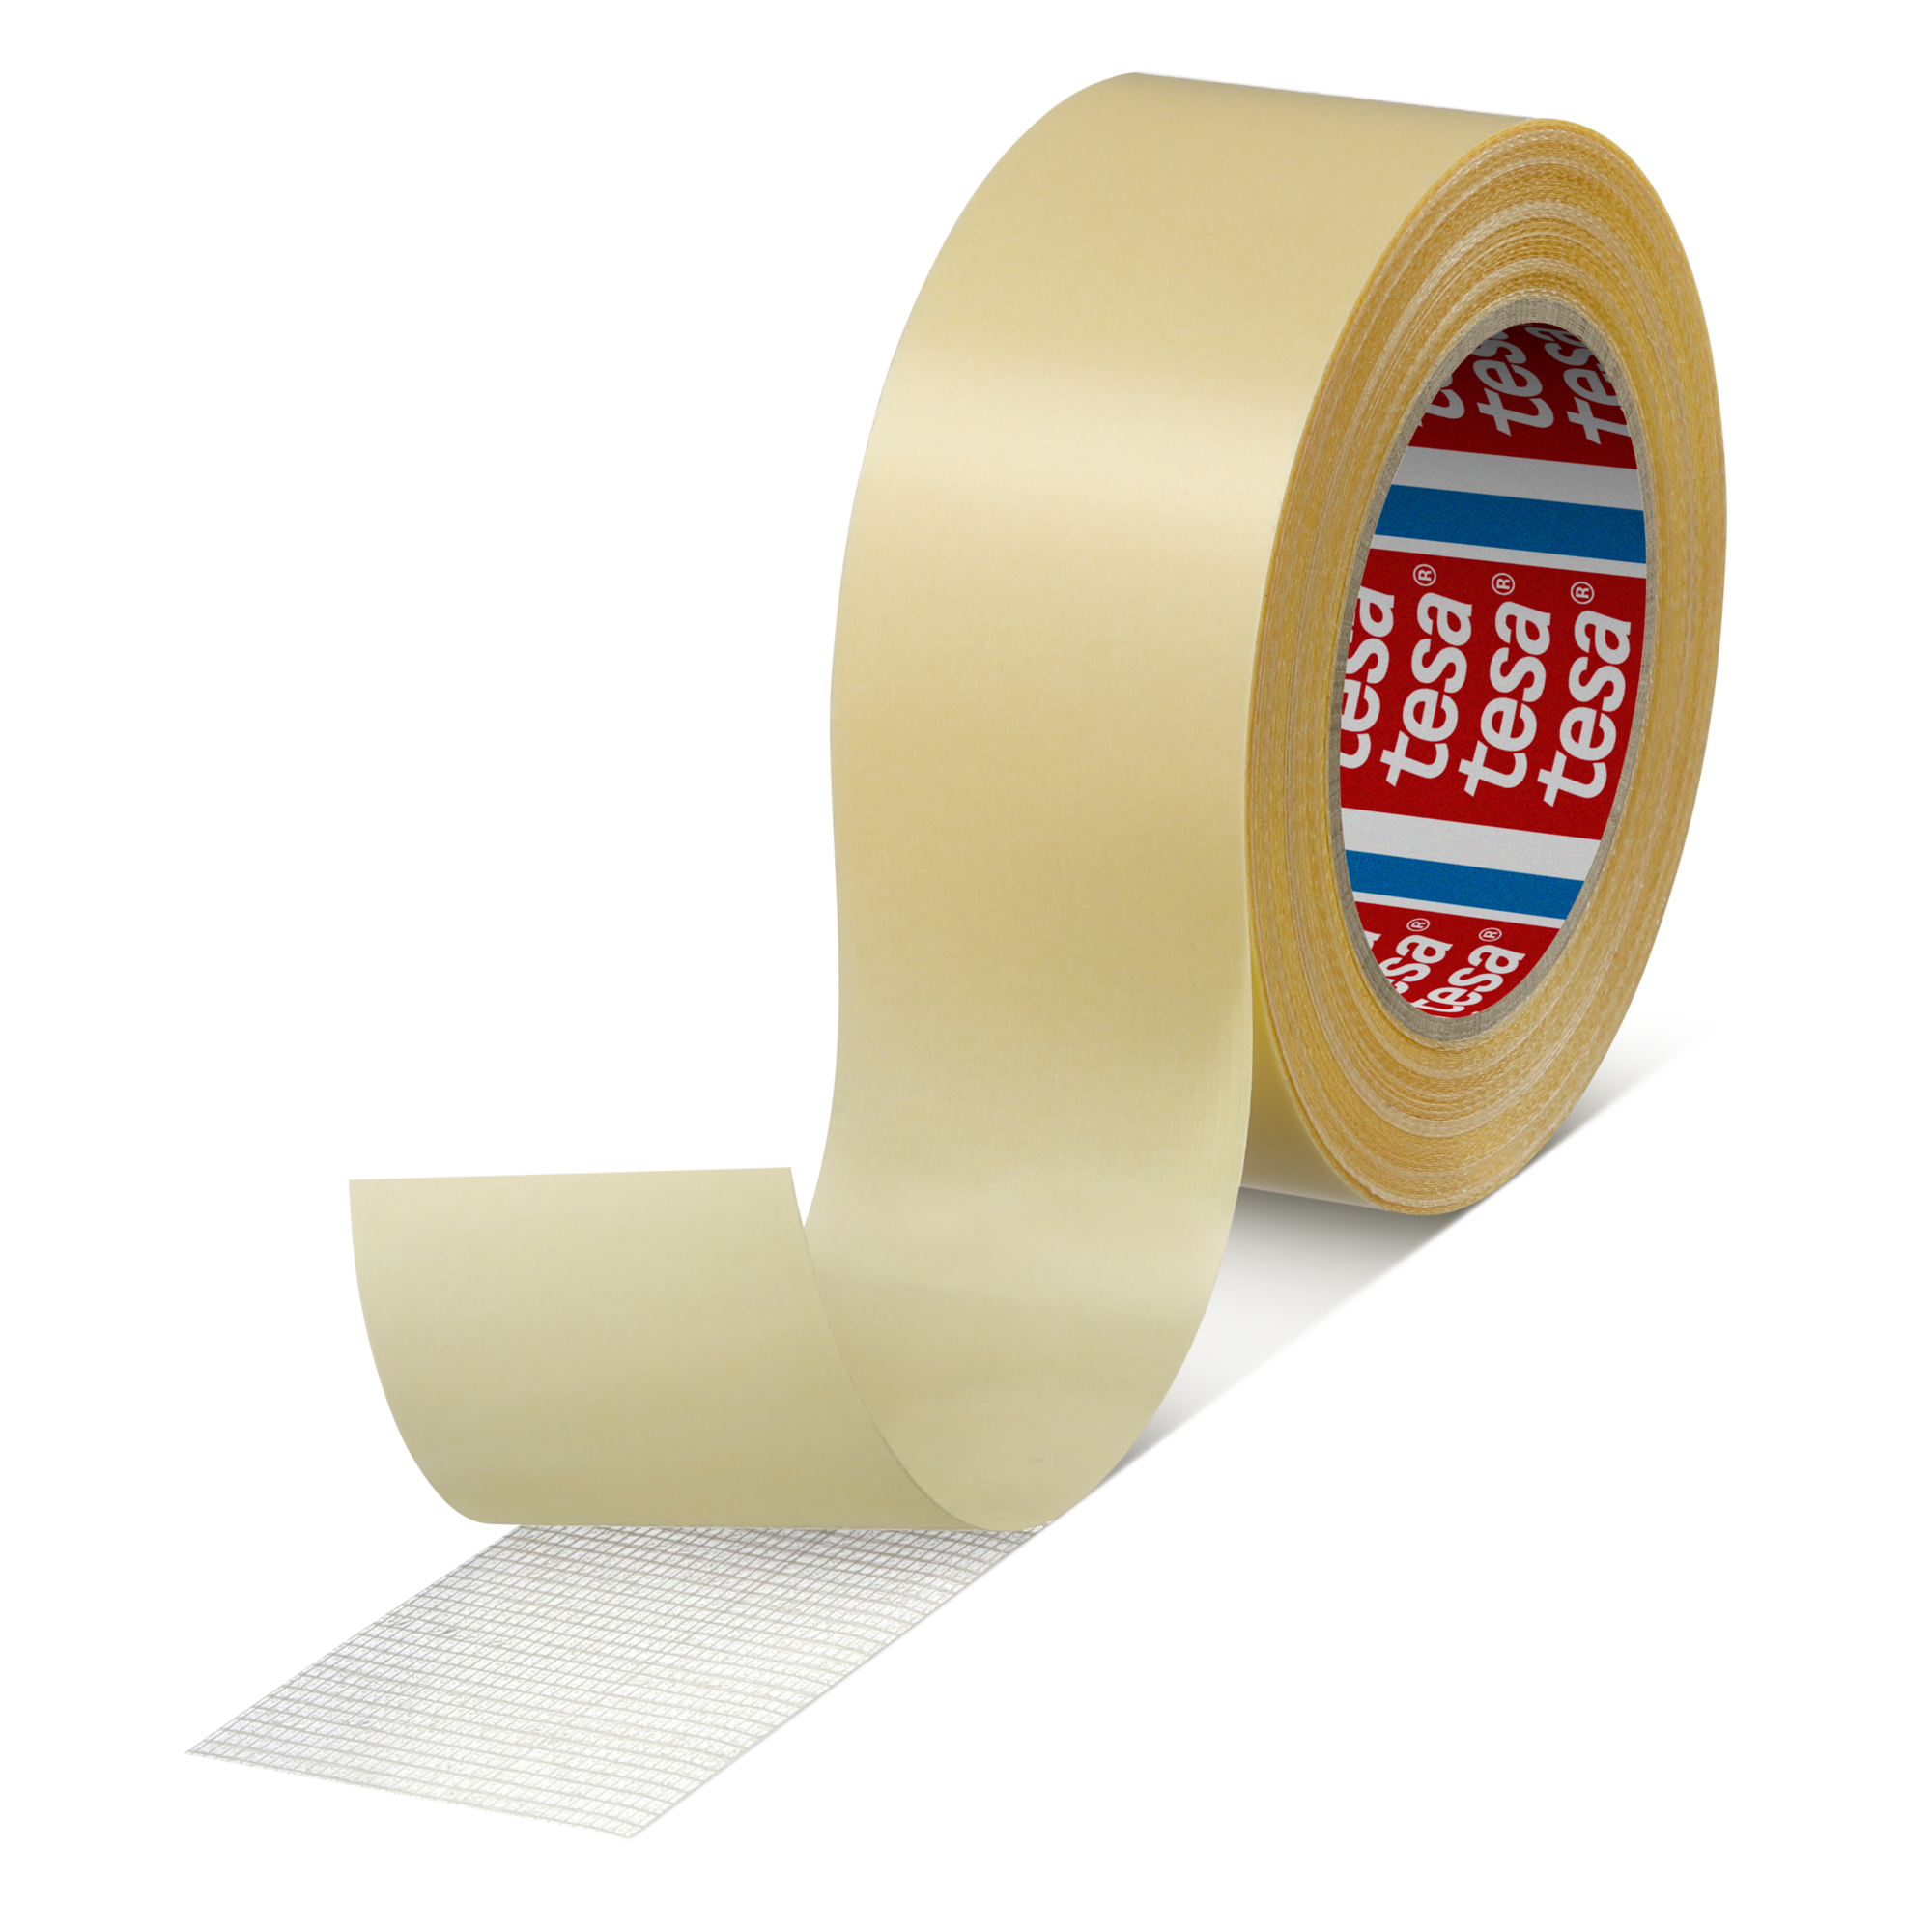 Tesa Tapes - Best Quality Adhesive Tapes Suppliers in UAE | Sabin Plastic